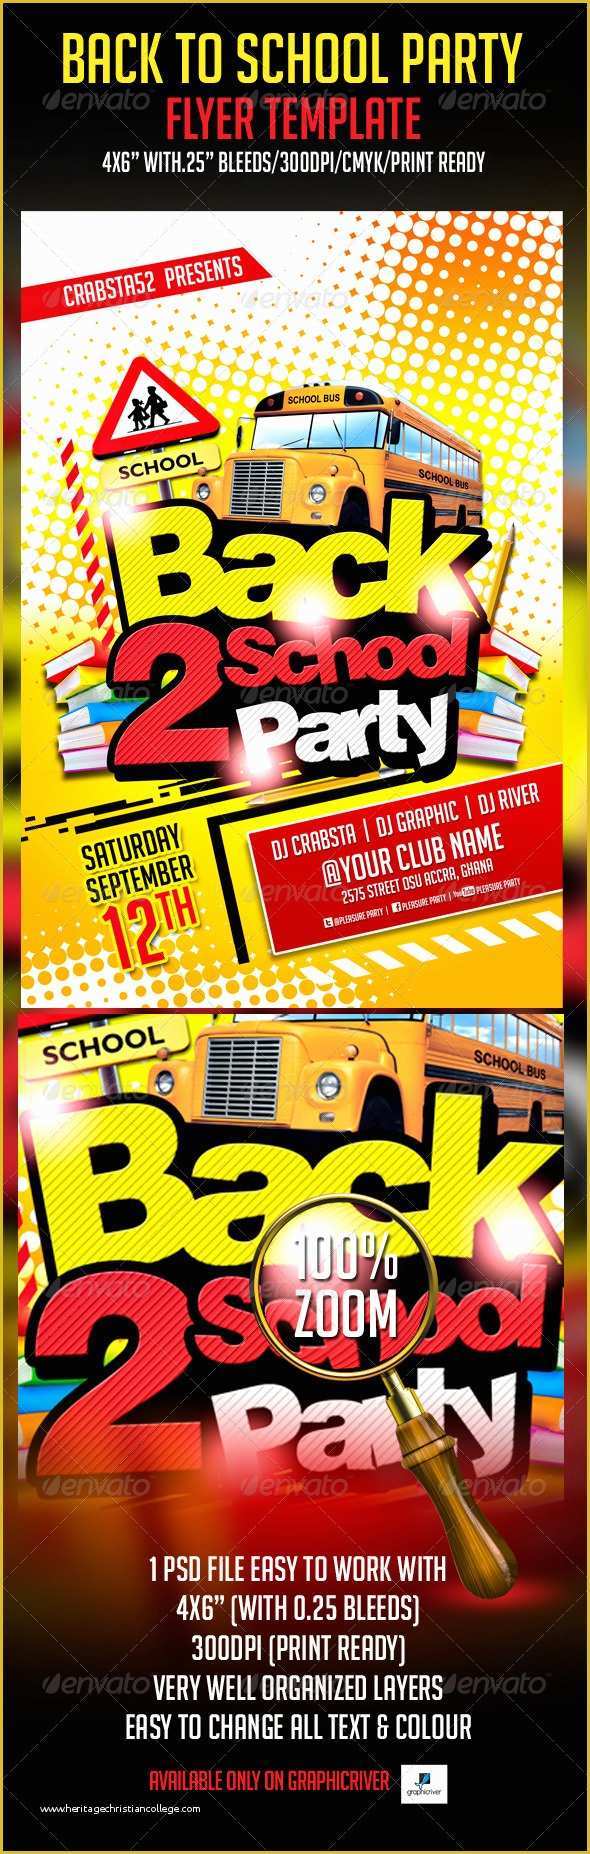 Back to School Bash Flyer Template Free Of Back to School Party Flyer Template by Crabsta52